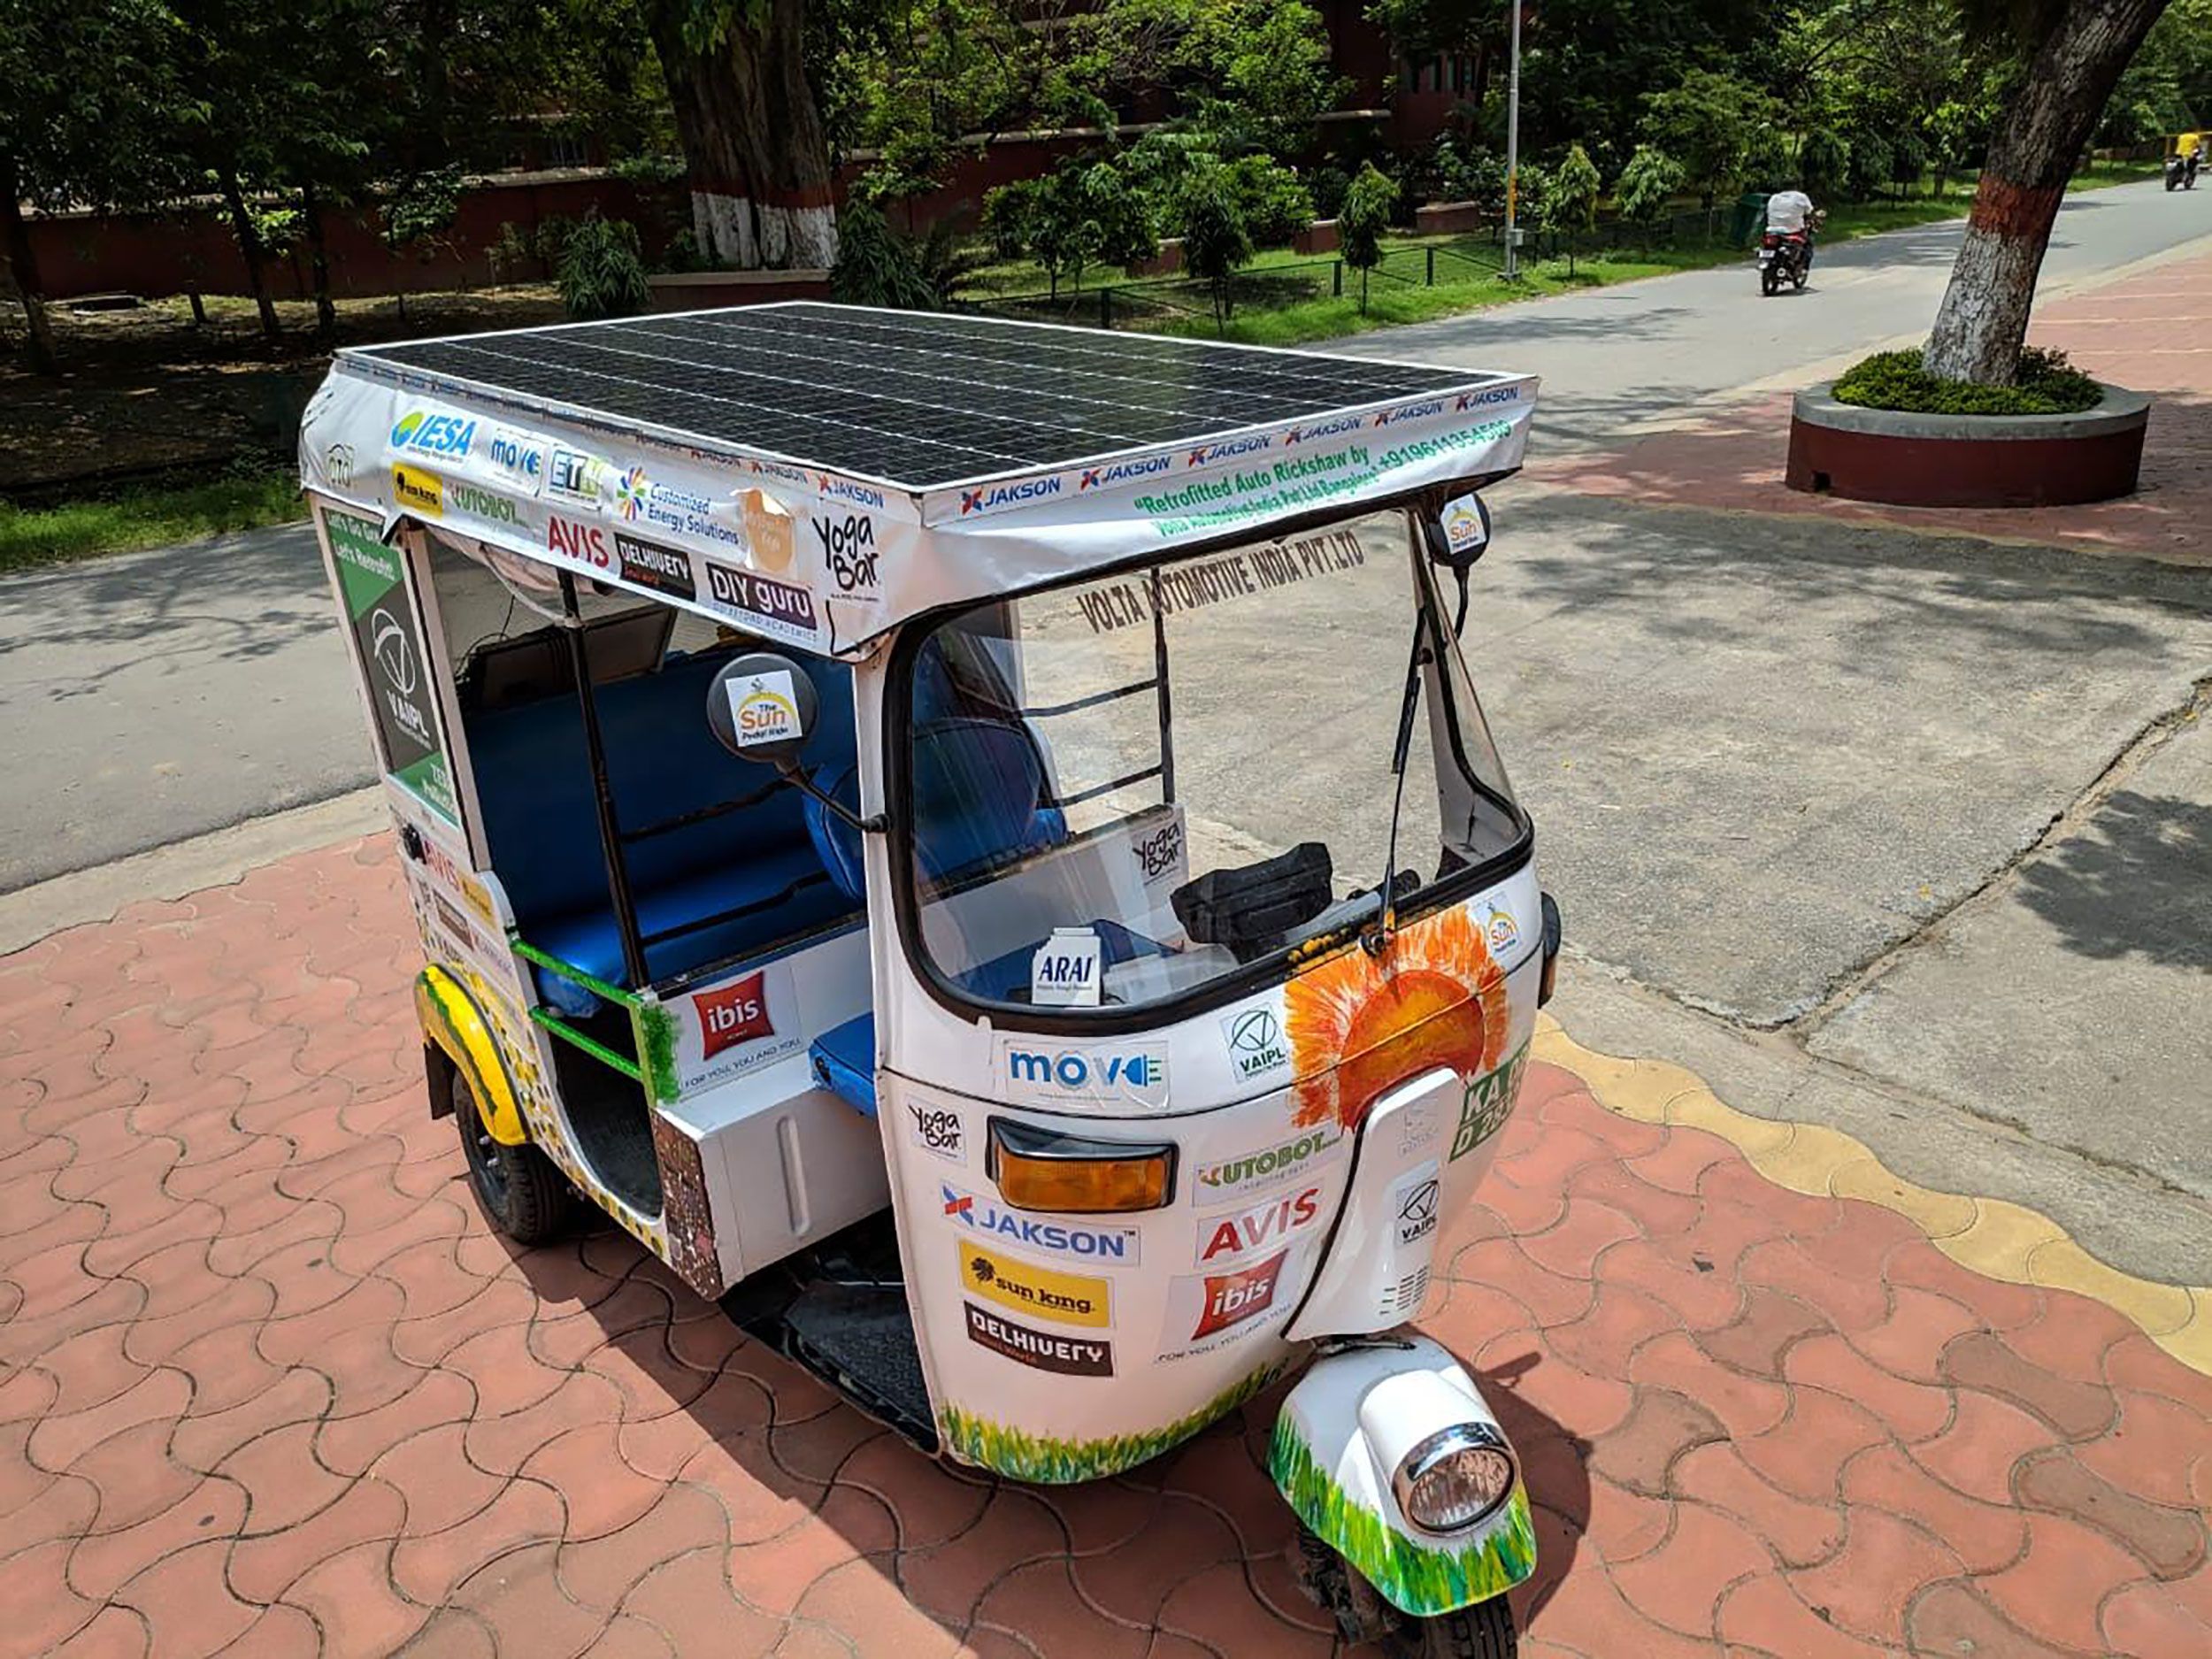 <strong>City solar:</strong> While Reddy's annual adventures are usually done on two wheels, in 2019, he created a solar-powered tuk-tuk to complete the 6,000 kilometer (3,728 mile) "Golden Quadrilateral" route in India between Mumbai, Delhi, Kolkata and Chennai. Tuk-tuks are a hugely popular mode of transport in urban India, and Reddy hoped the retrofitted electric tuk-tuk, <a href="index.php?page=&url=https%3A%2F%2Fthesunpedalride.com%2F2021%2F04%2F16%2Fthe-sunpedal-ride-india-2019-on-a-solar-electric-tuk-tuk%2F" target="_blank" target="_blank">which was partially powered by solar panels</a>, would show different ways to decarbonize public transport.